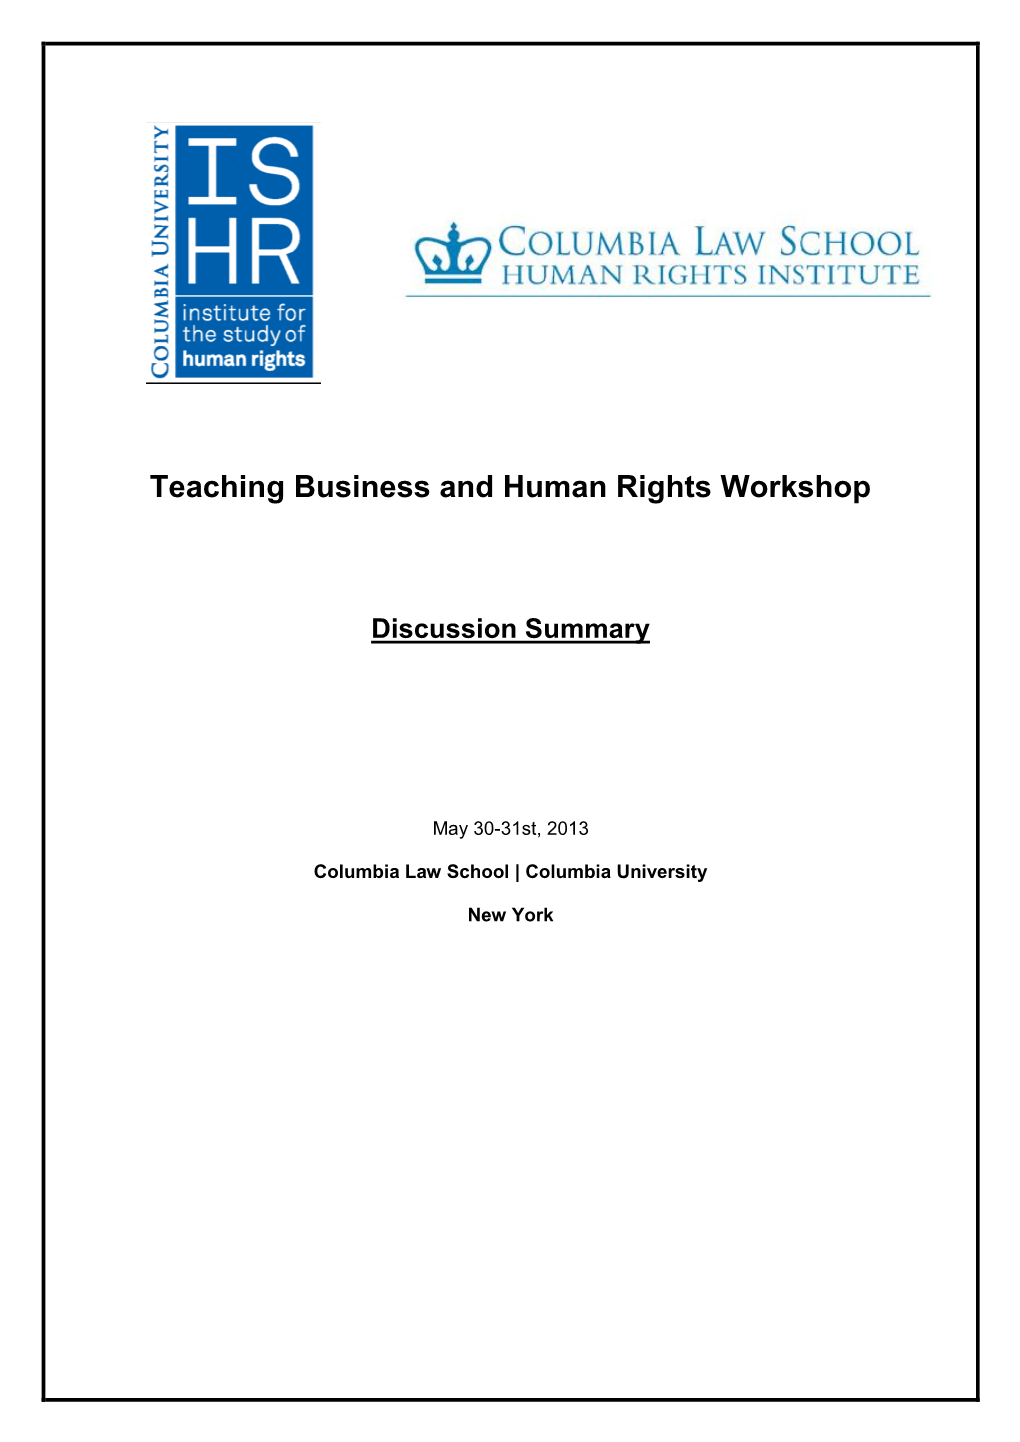 Teaching Business and Human Rights Workshop